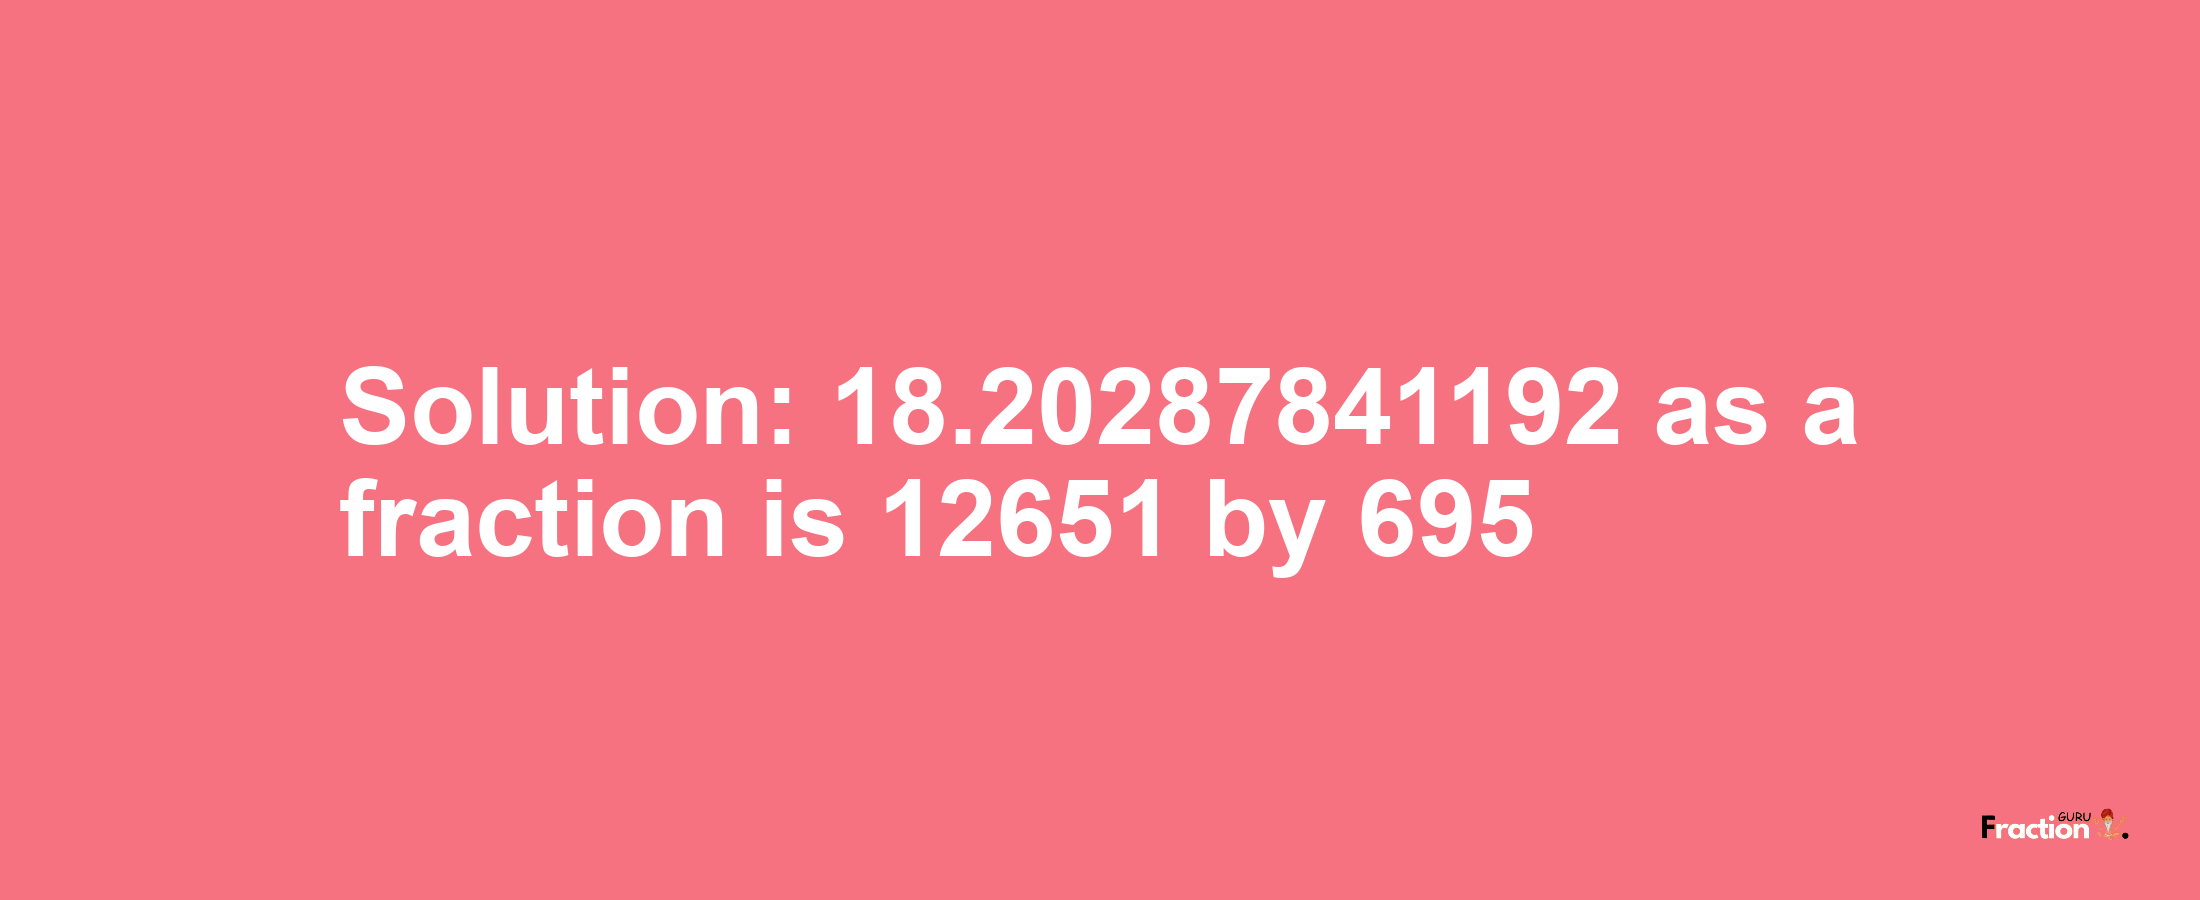 Solution:18.20287841192 as a fraction is 12651/695